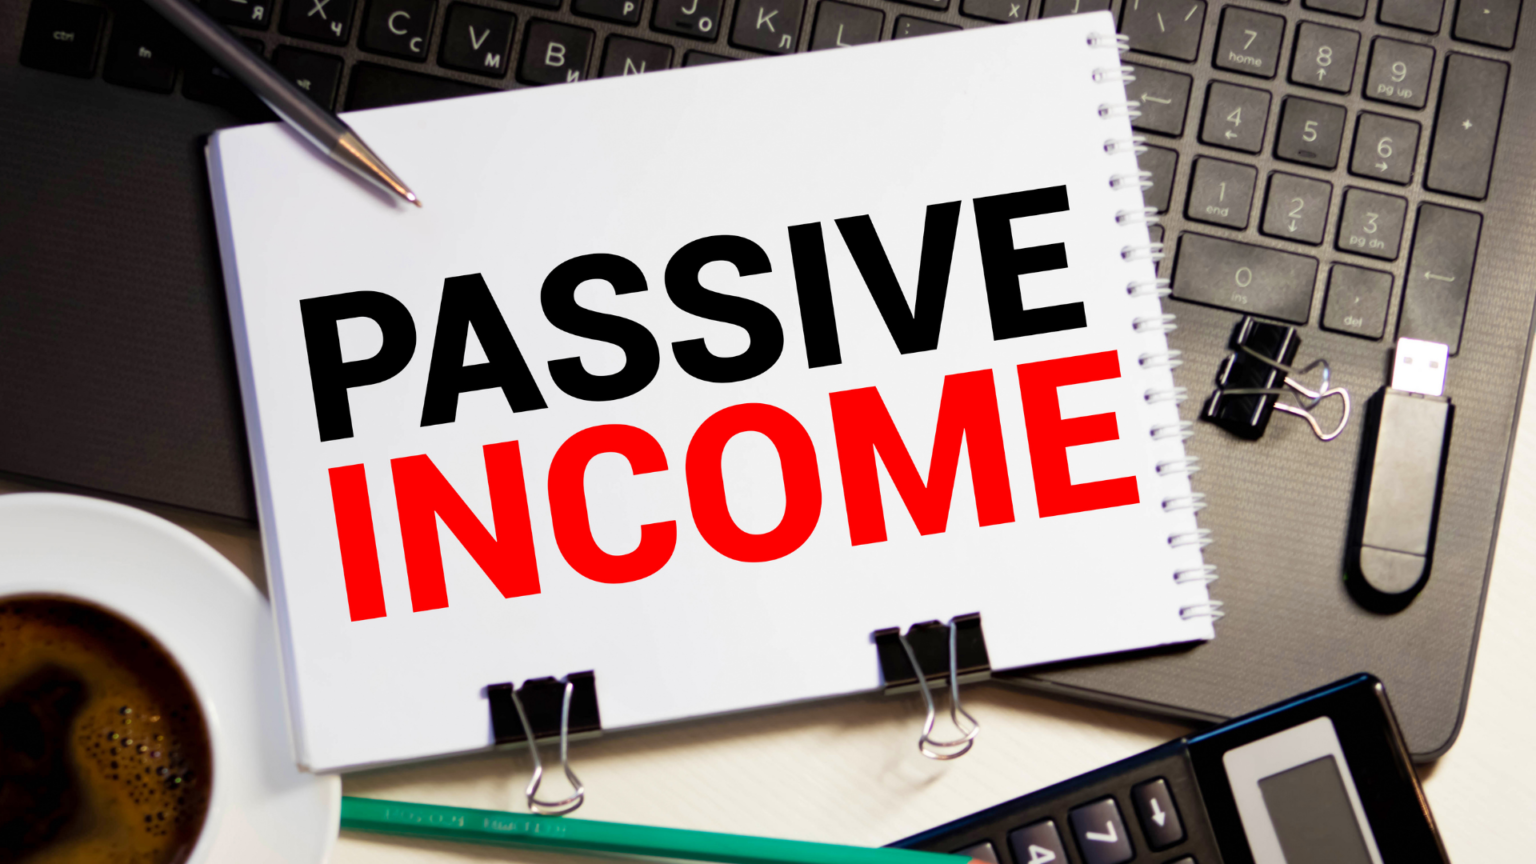 WITH MONTHLY INCOME / COMPOUND INCOME / PASSIVE INCOME